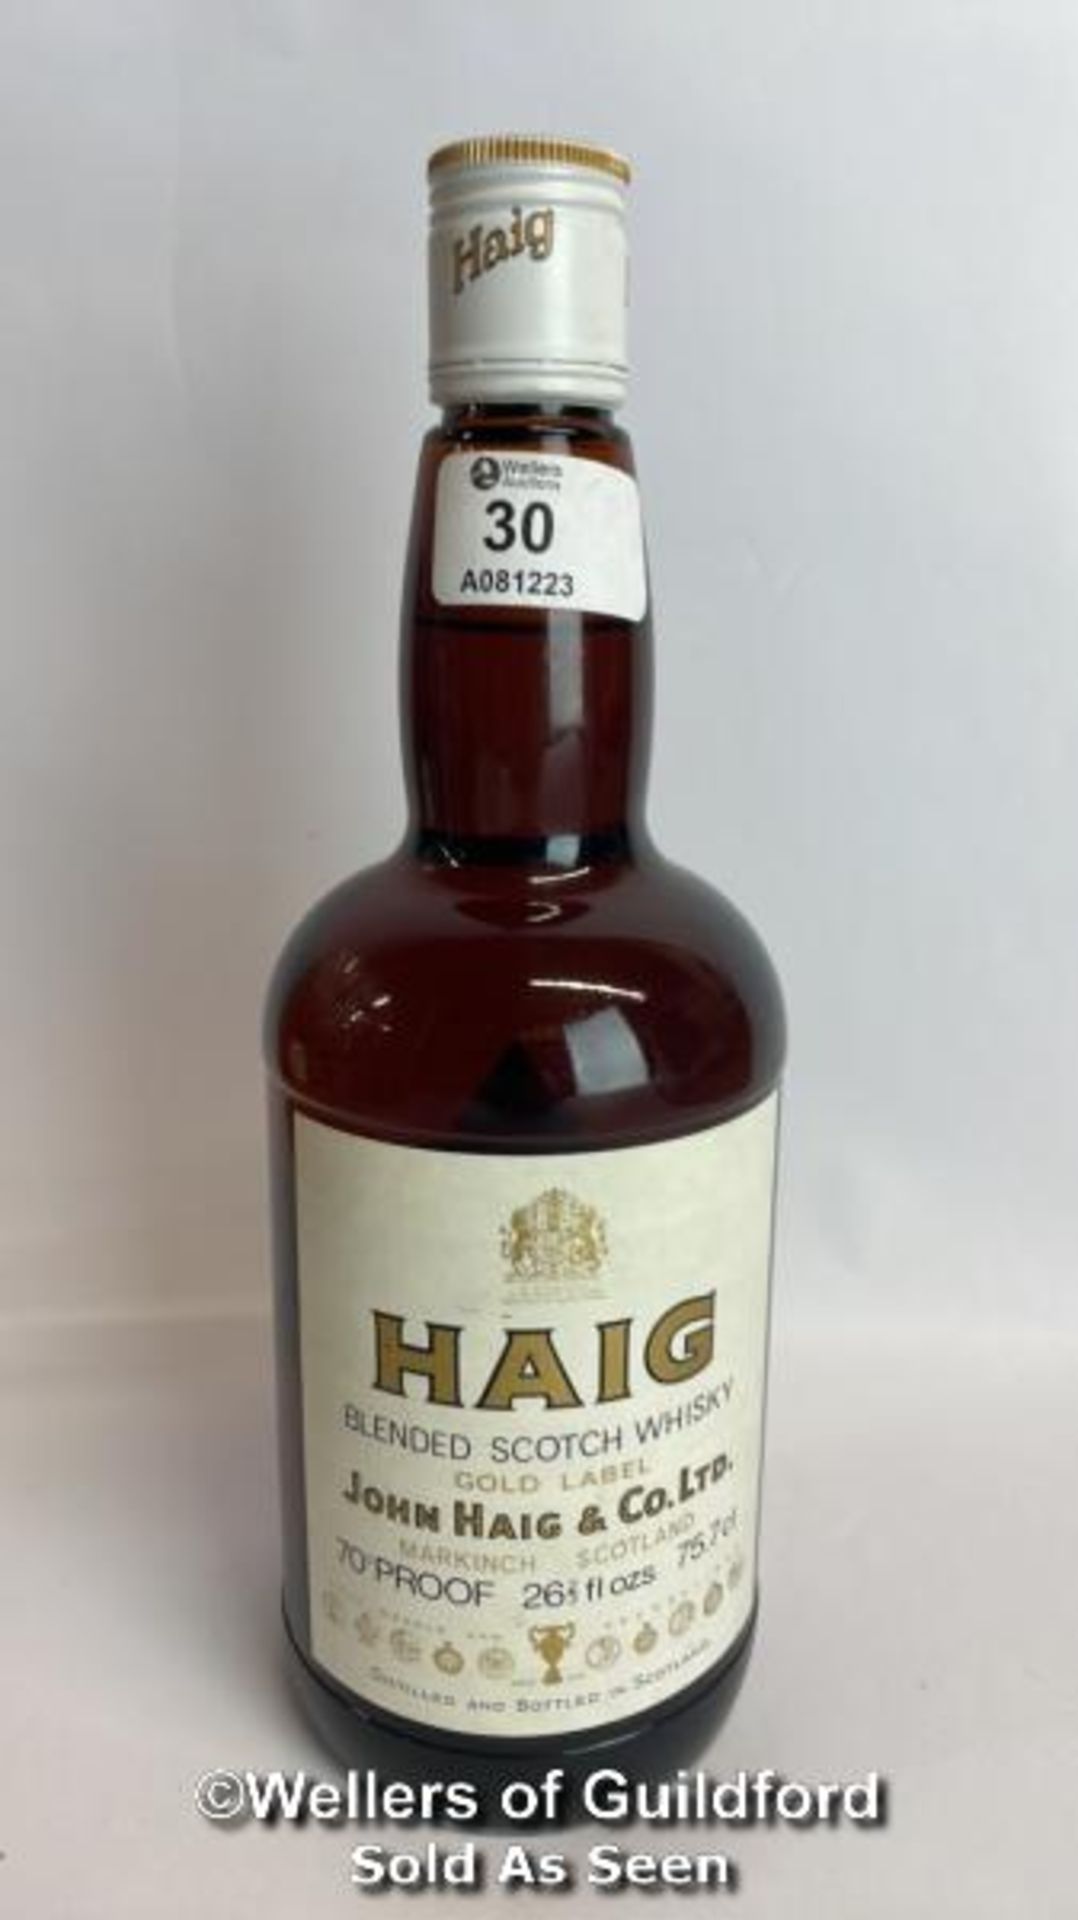 Haig Blended Scotch Whisky Gold Label, 70 Proof, 75.7cl / Please see images for fill level and - Image 2 of 10